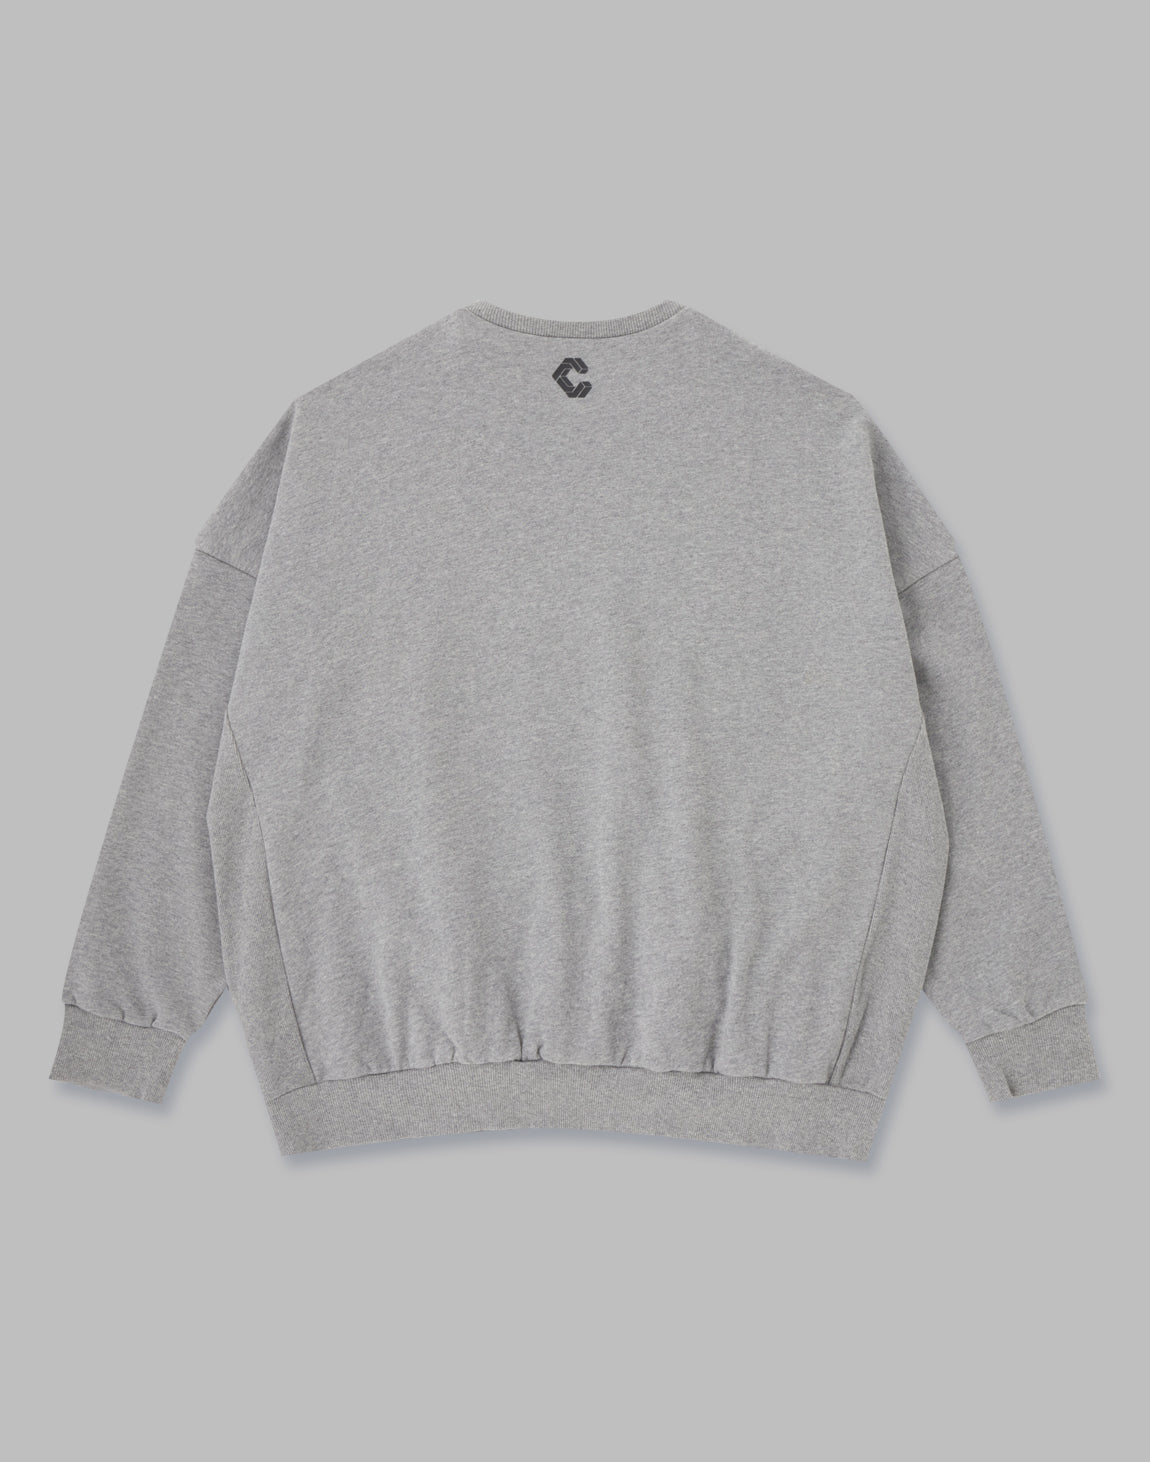 CRONOS BUTTONED SWEAT TOP – クロノス CRONOS Official Store